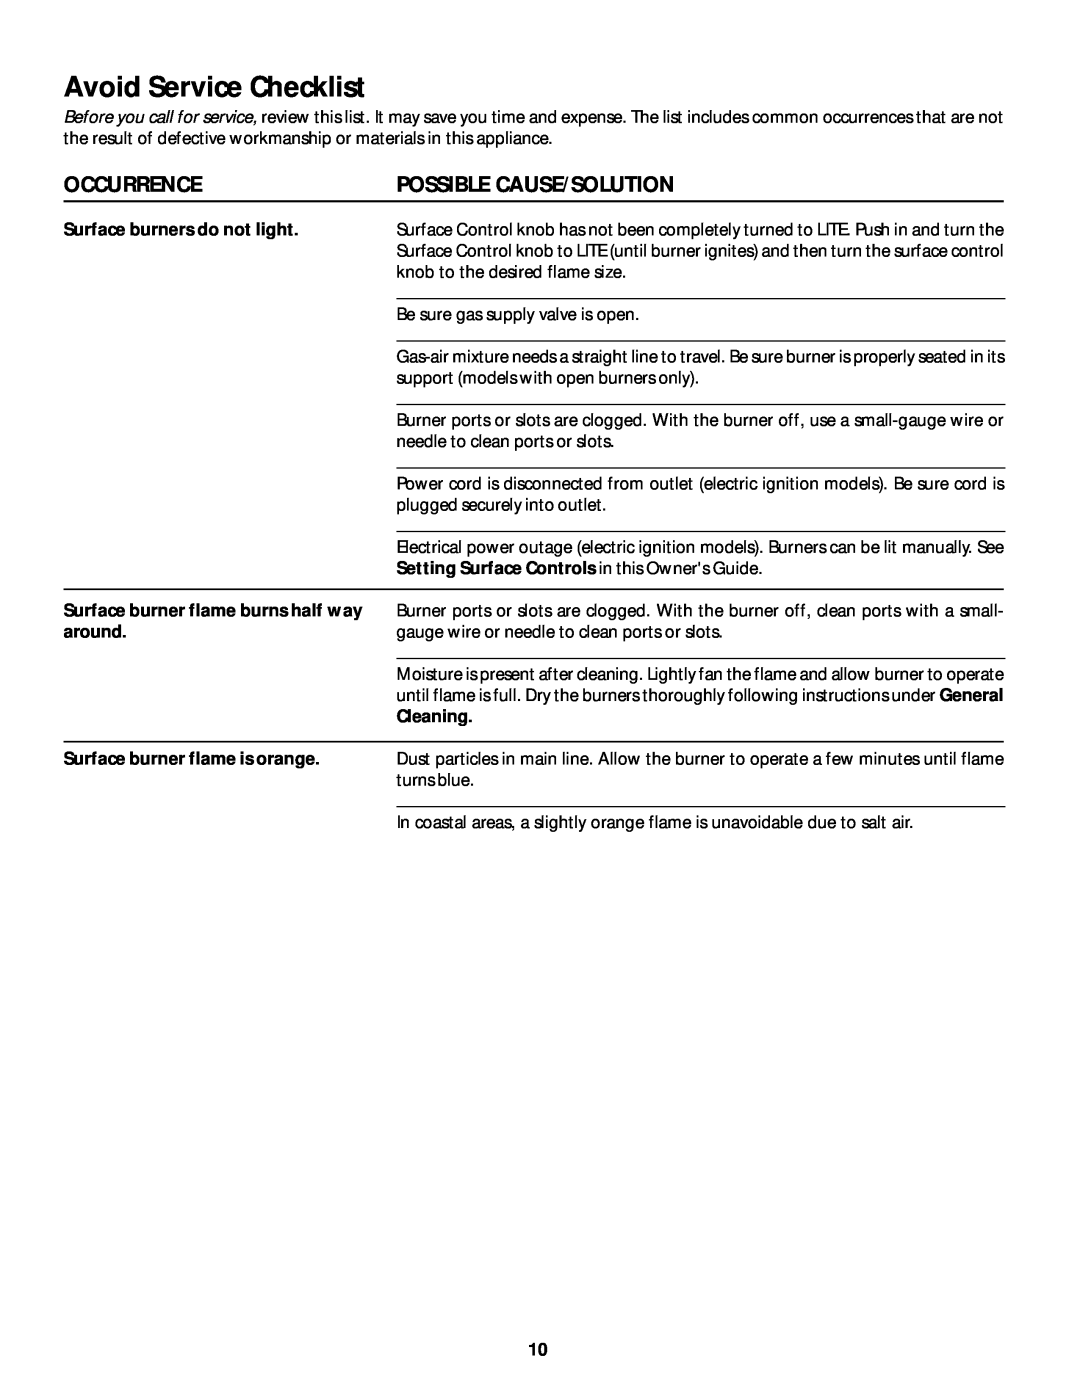 White-Westinghouse 318200659 manual Avoid Service Checklist, Surface burners do not light, Cleaning 